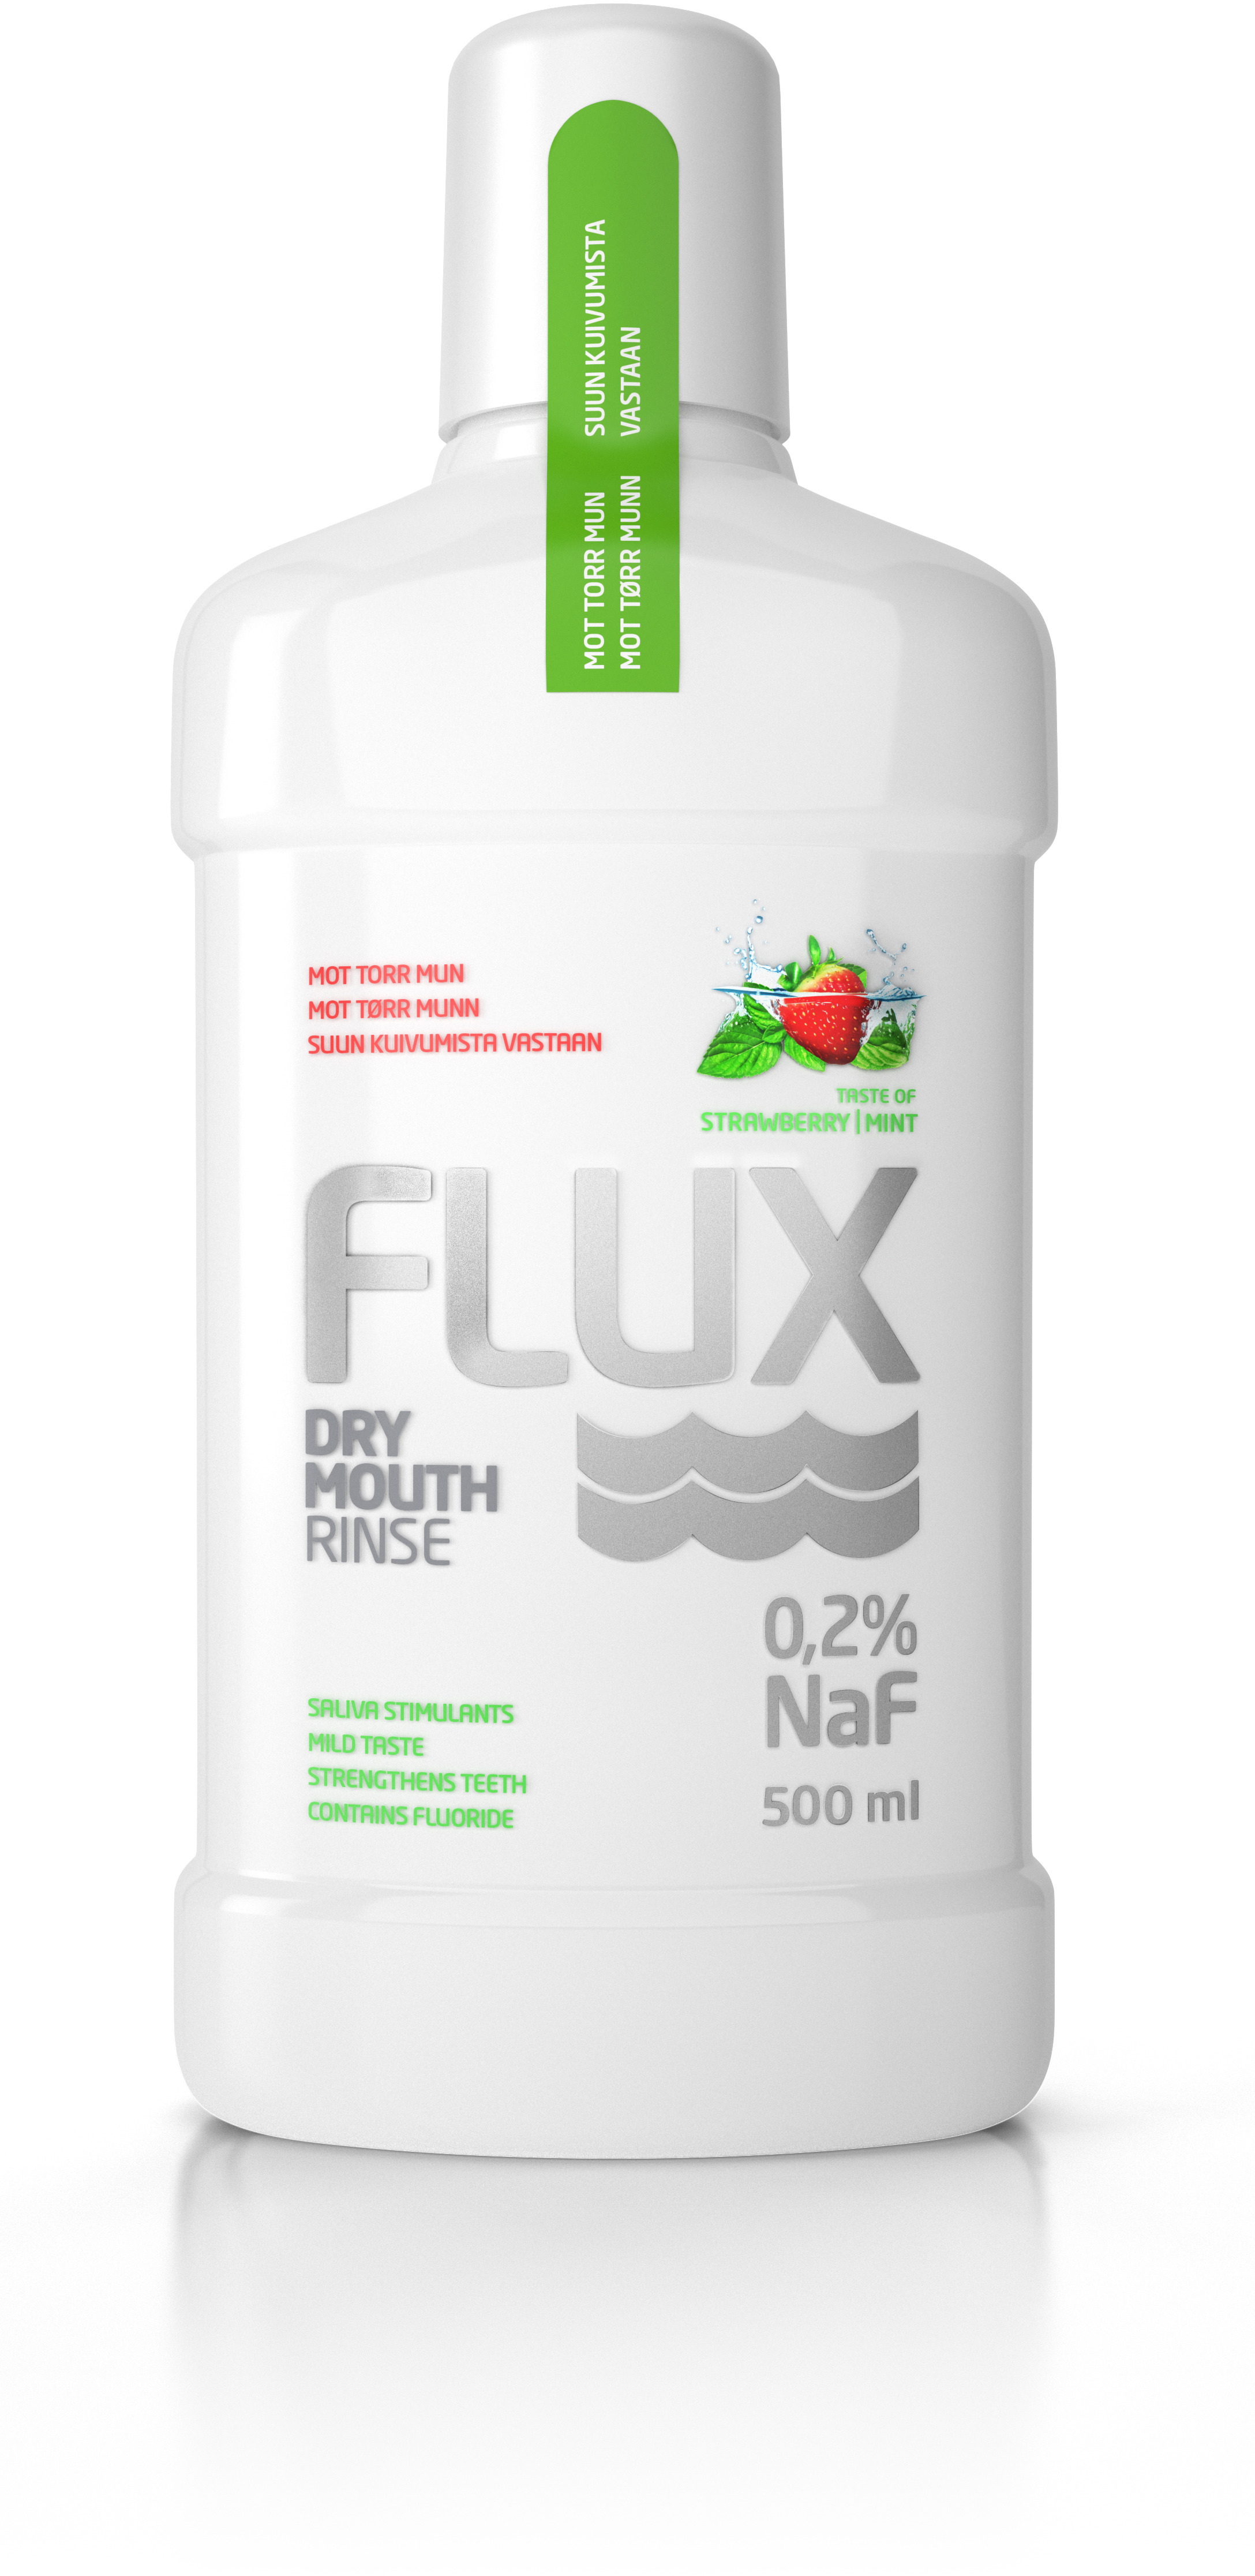 FLUX Dry Mouth Rinse 500 ml